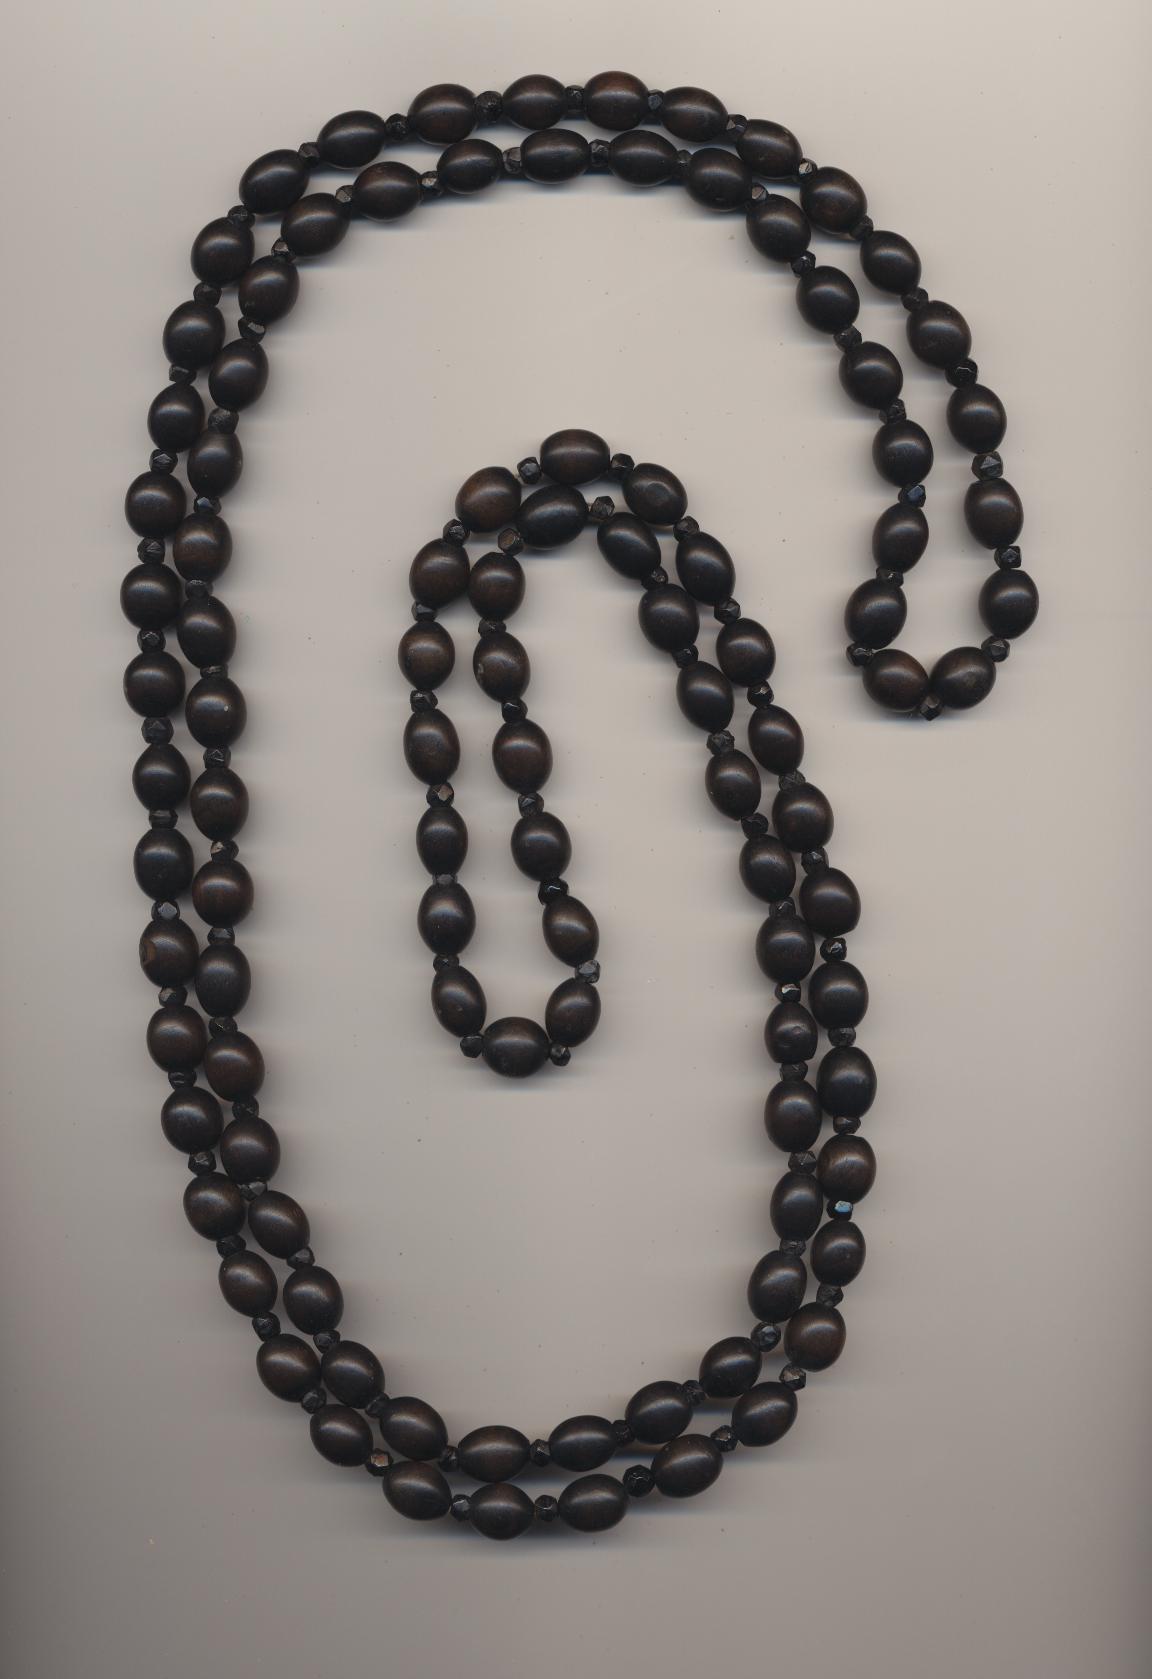 Antique mourning necklace of hand made ebony wood beads and small French jet glass beads, ca.1900, length 59'' 150cm.